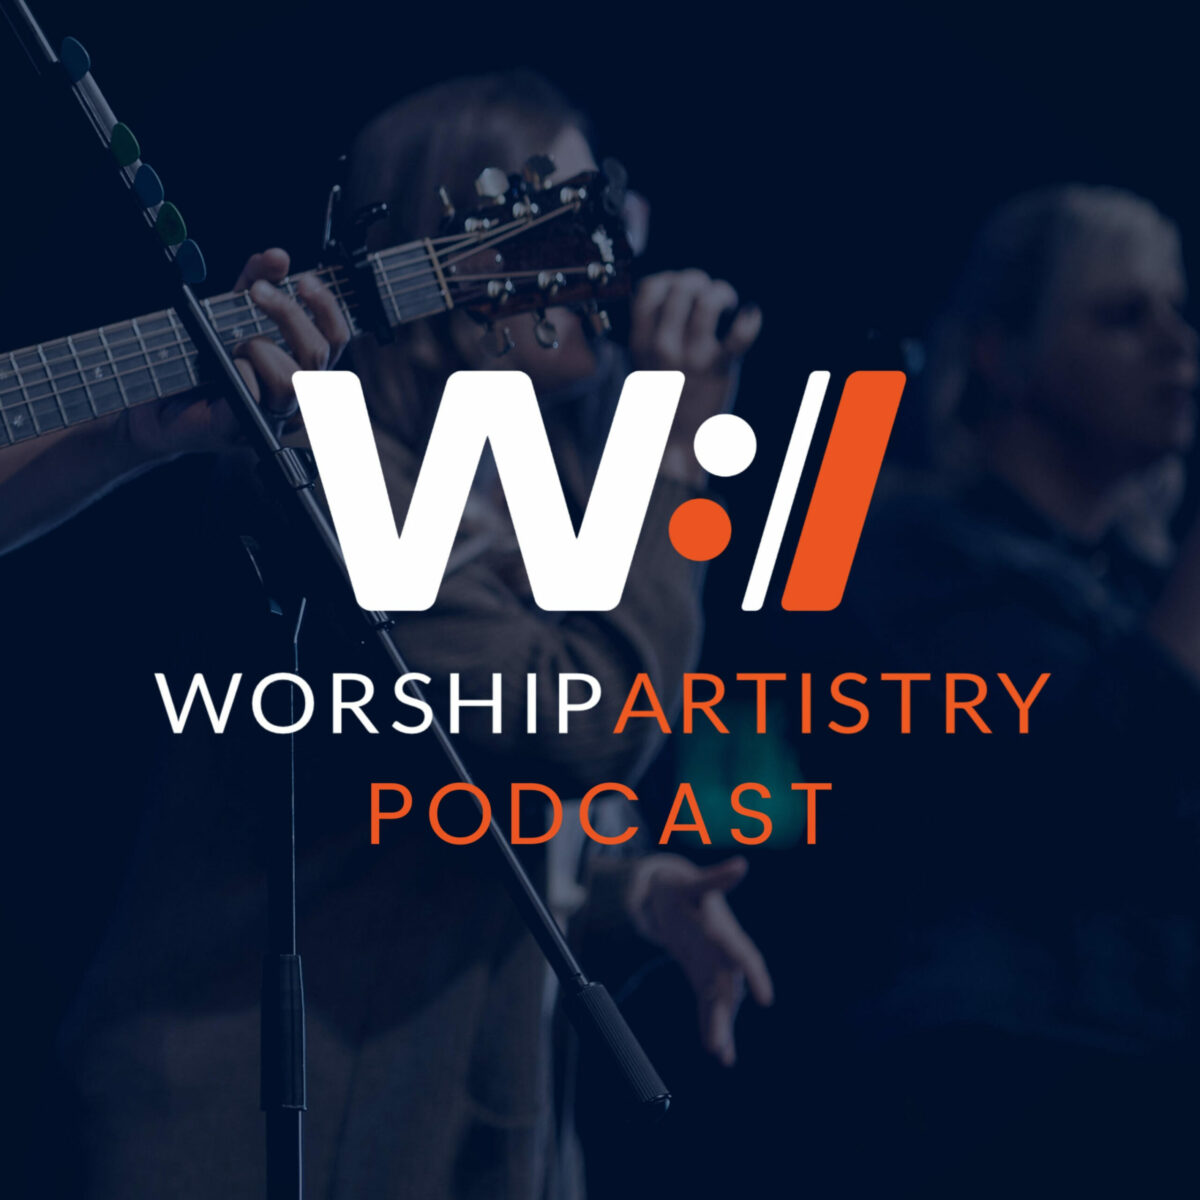 Worship Artistry Podcast 192: Producing the Gospel for Gen Z with Josh Holiday of Elevation Rhythm